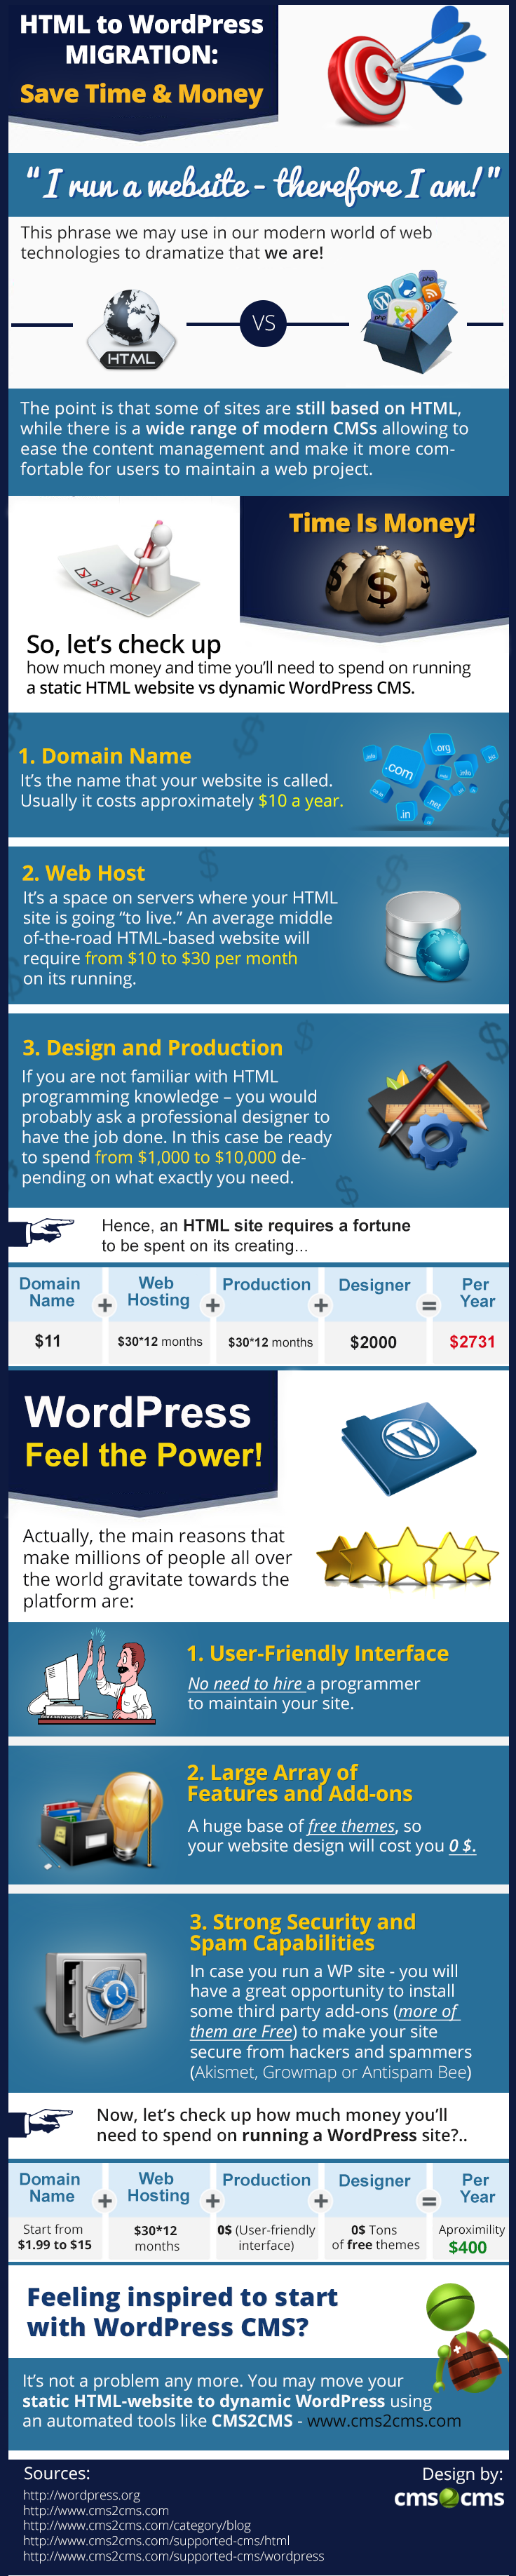 how-much-does-it-cost-to-run-wordpress-website-infographic